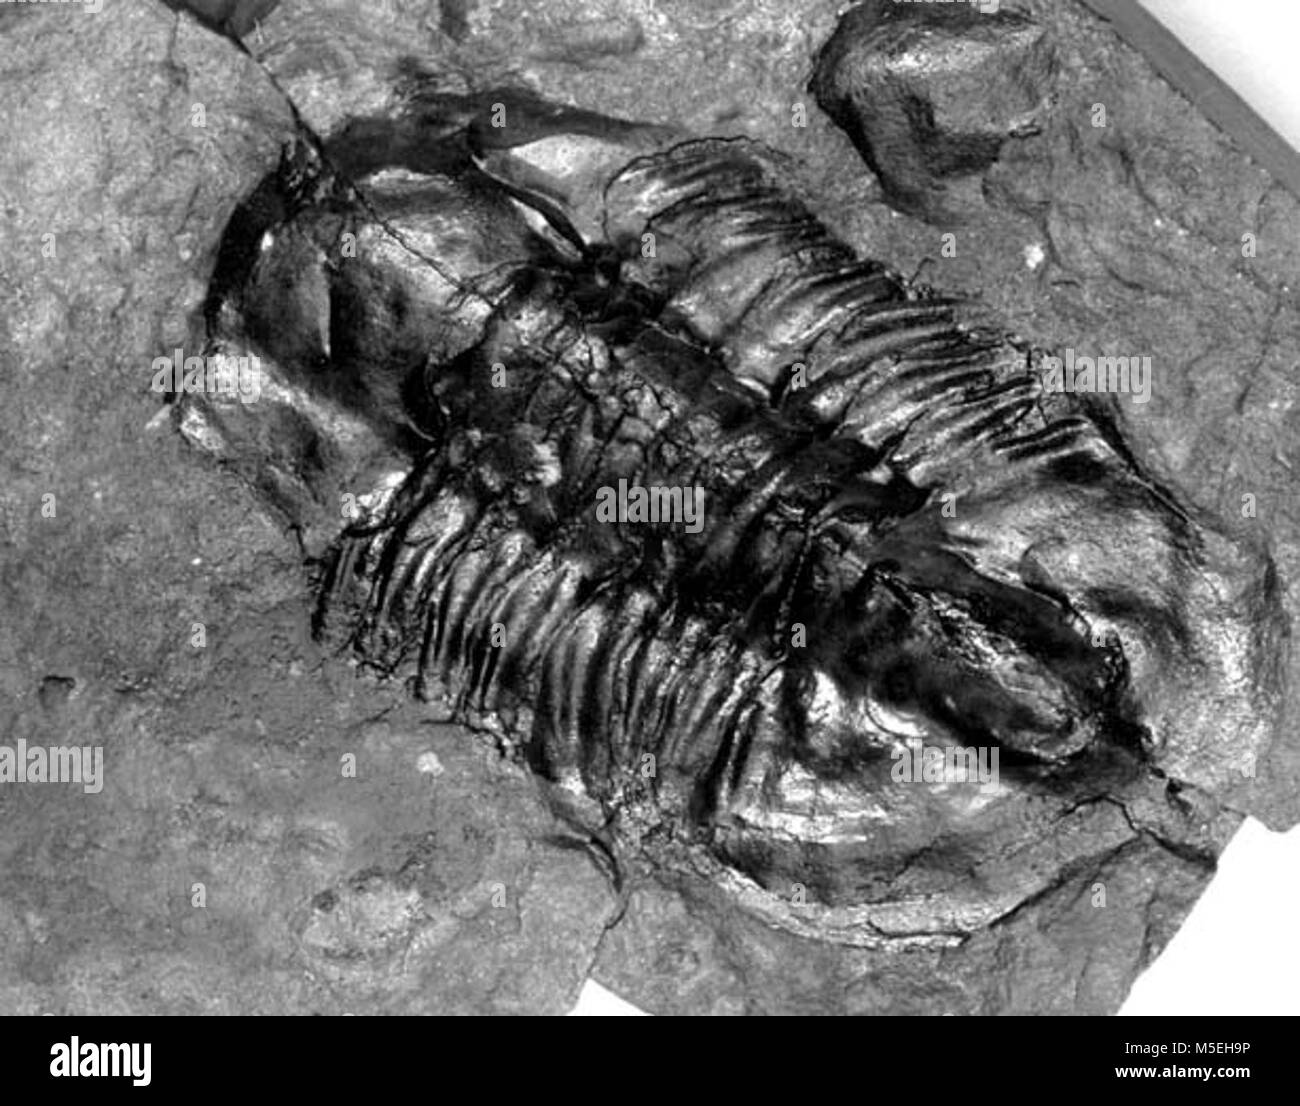 Grand Canyon Trilobite Fossil  TRILOBITE FOSSIL GRCA # 21399. 10 AUG 1988. PROBST, . Stock Photo